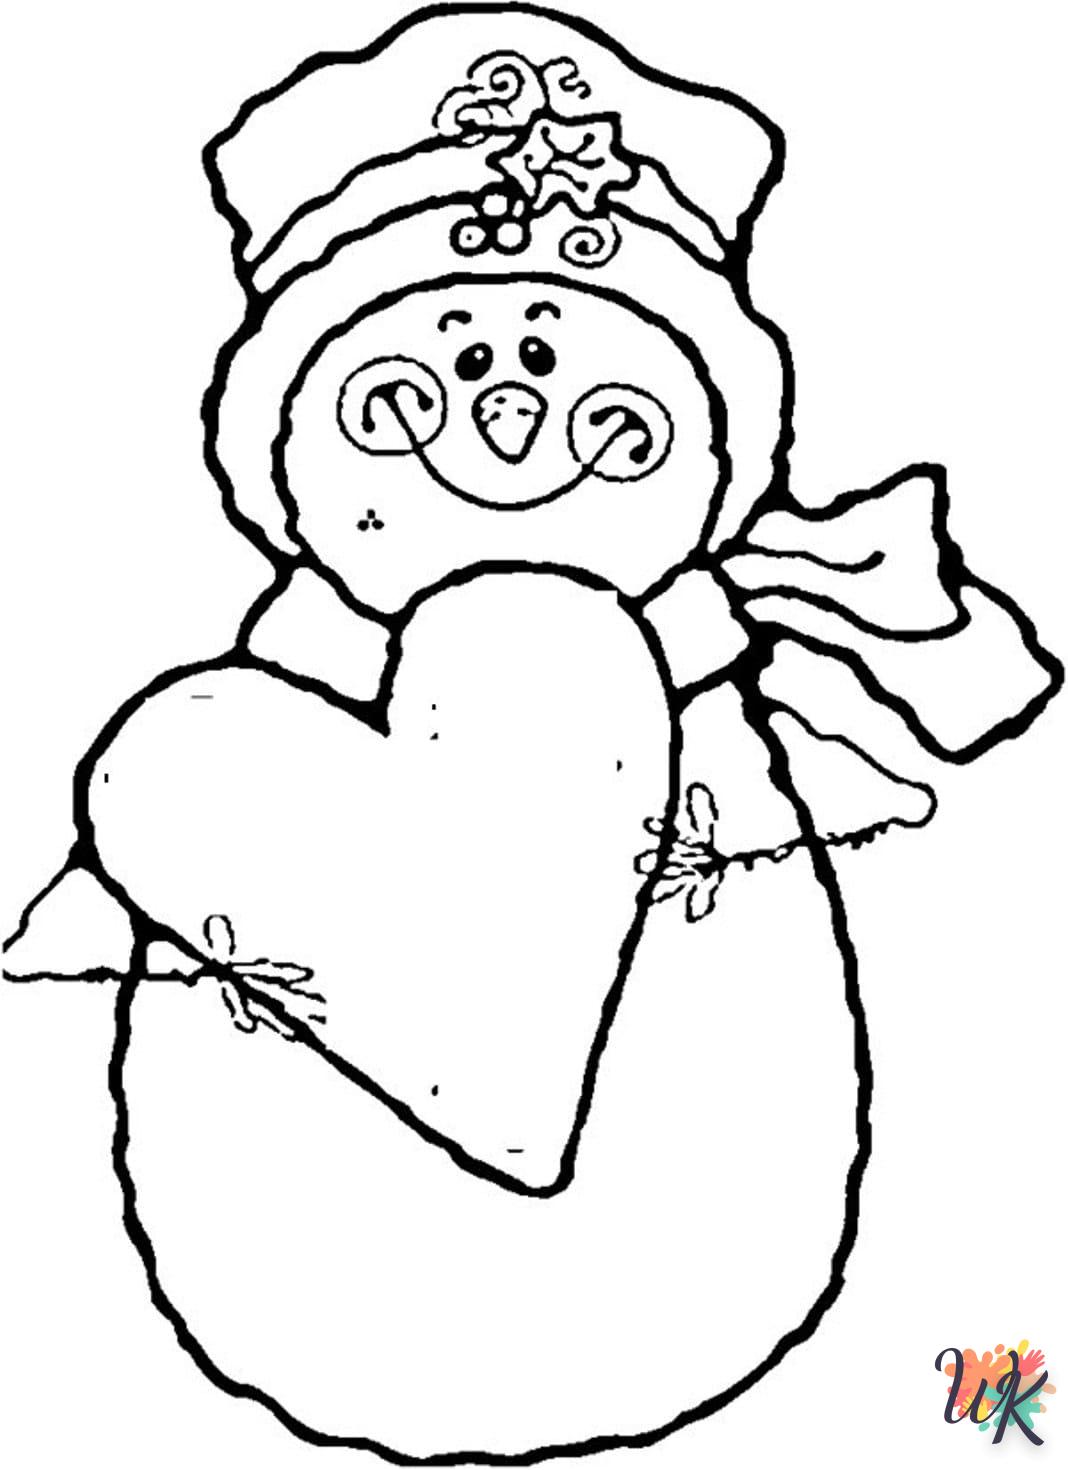 Snowman coloring page to print for 6 year olds